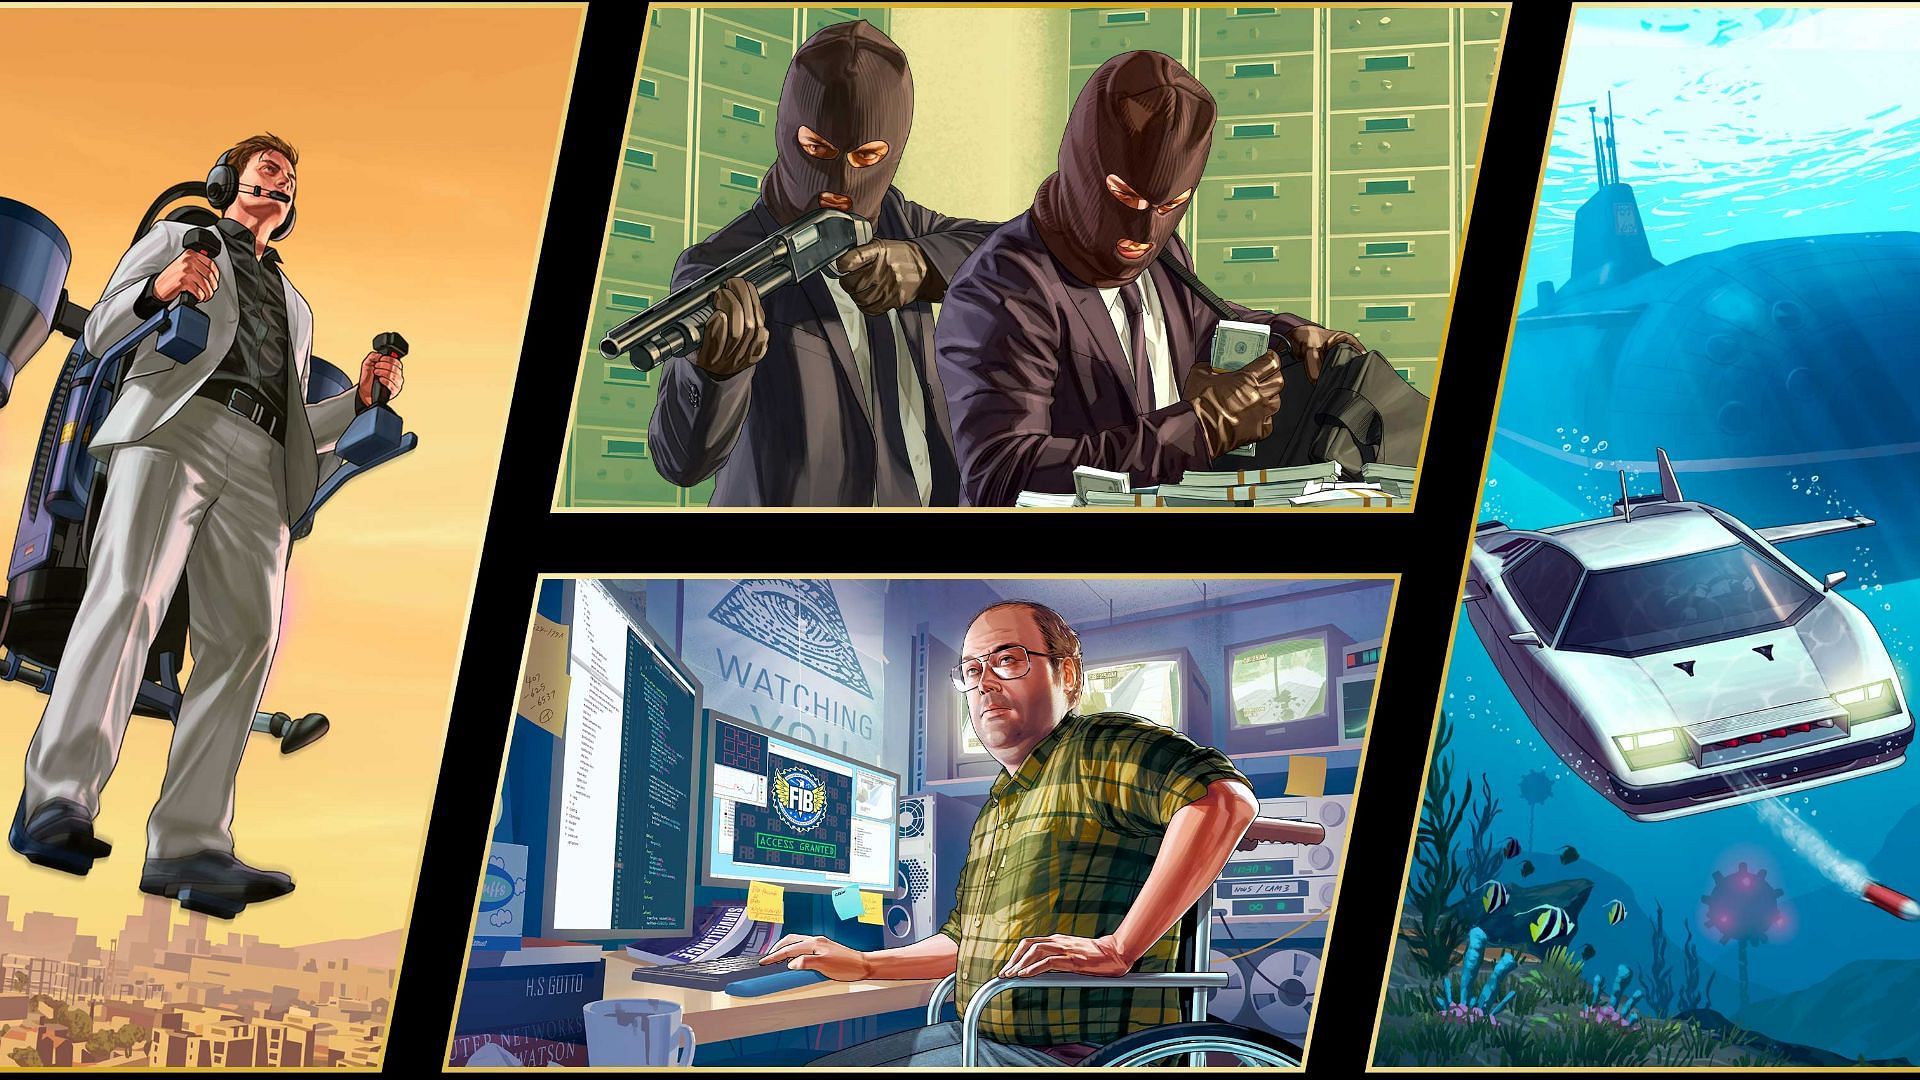 The Doomsday Heists has three separate acts (Image via Rockstar Games)